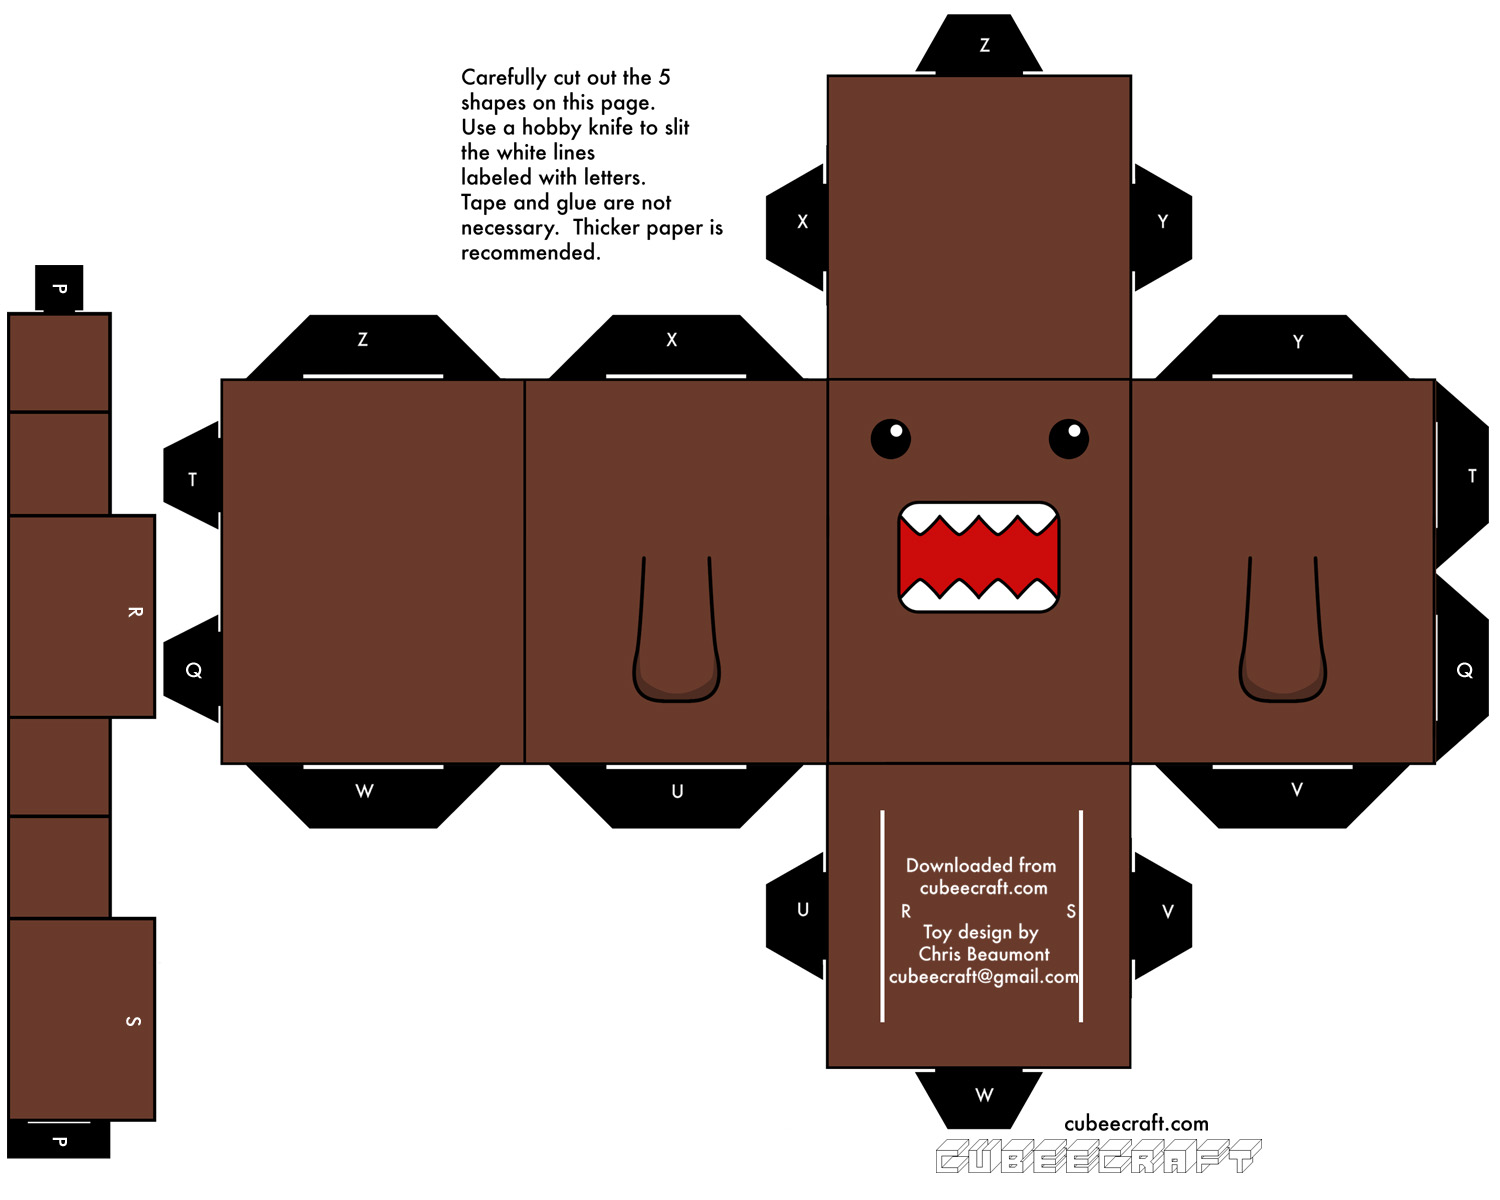 domo kun cut out - ahhh, now it's all crystal and stuff. But here's ...